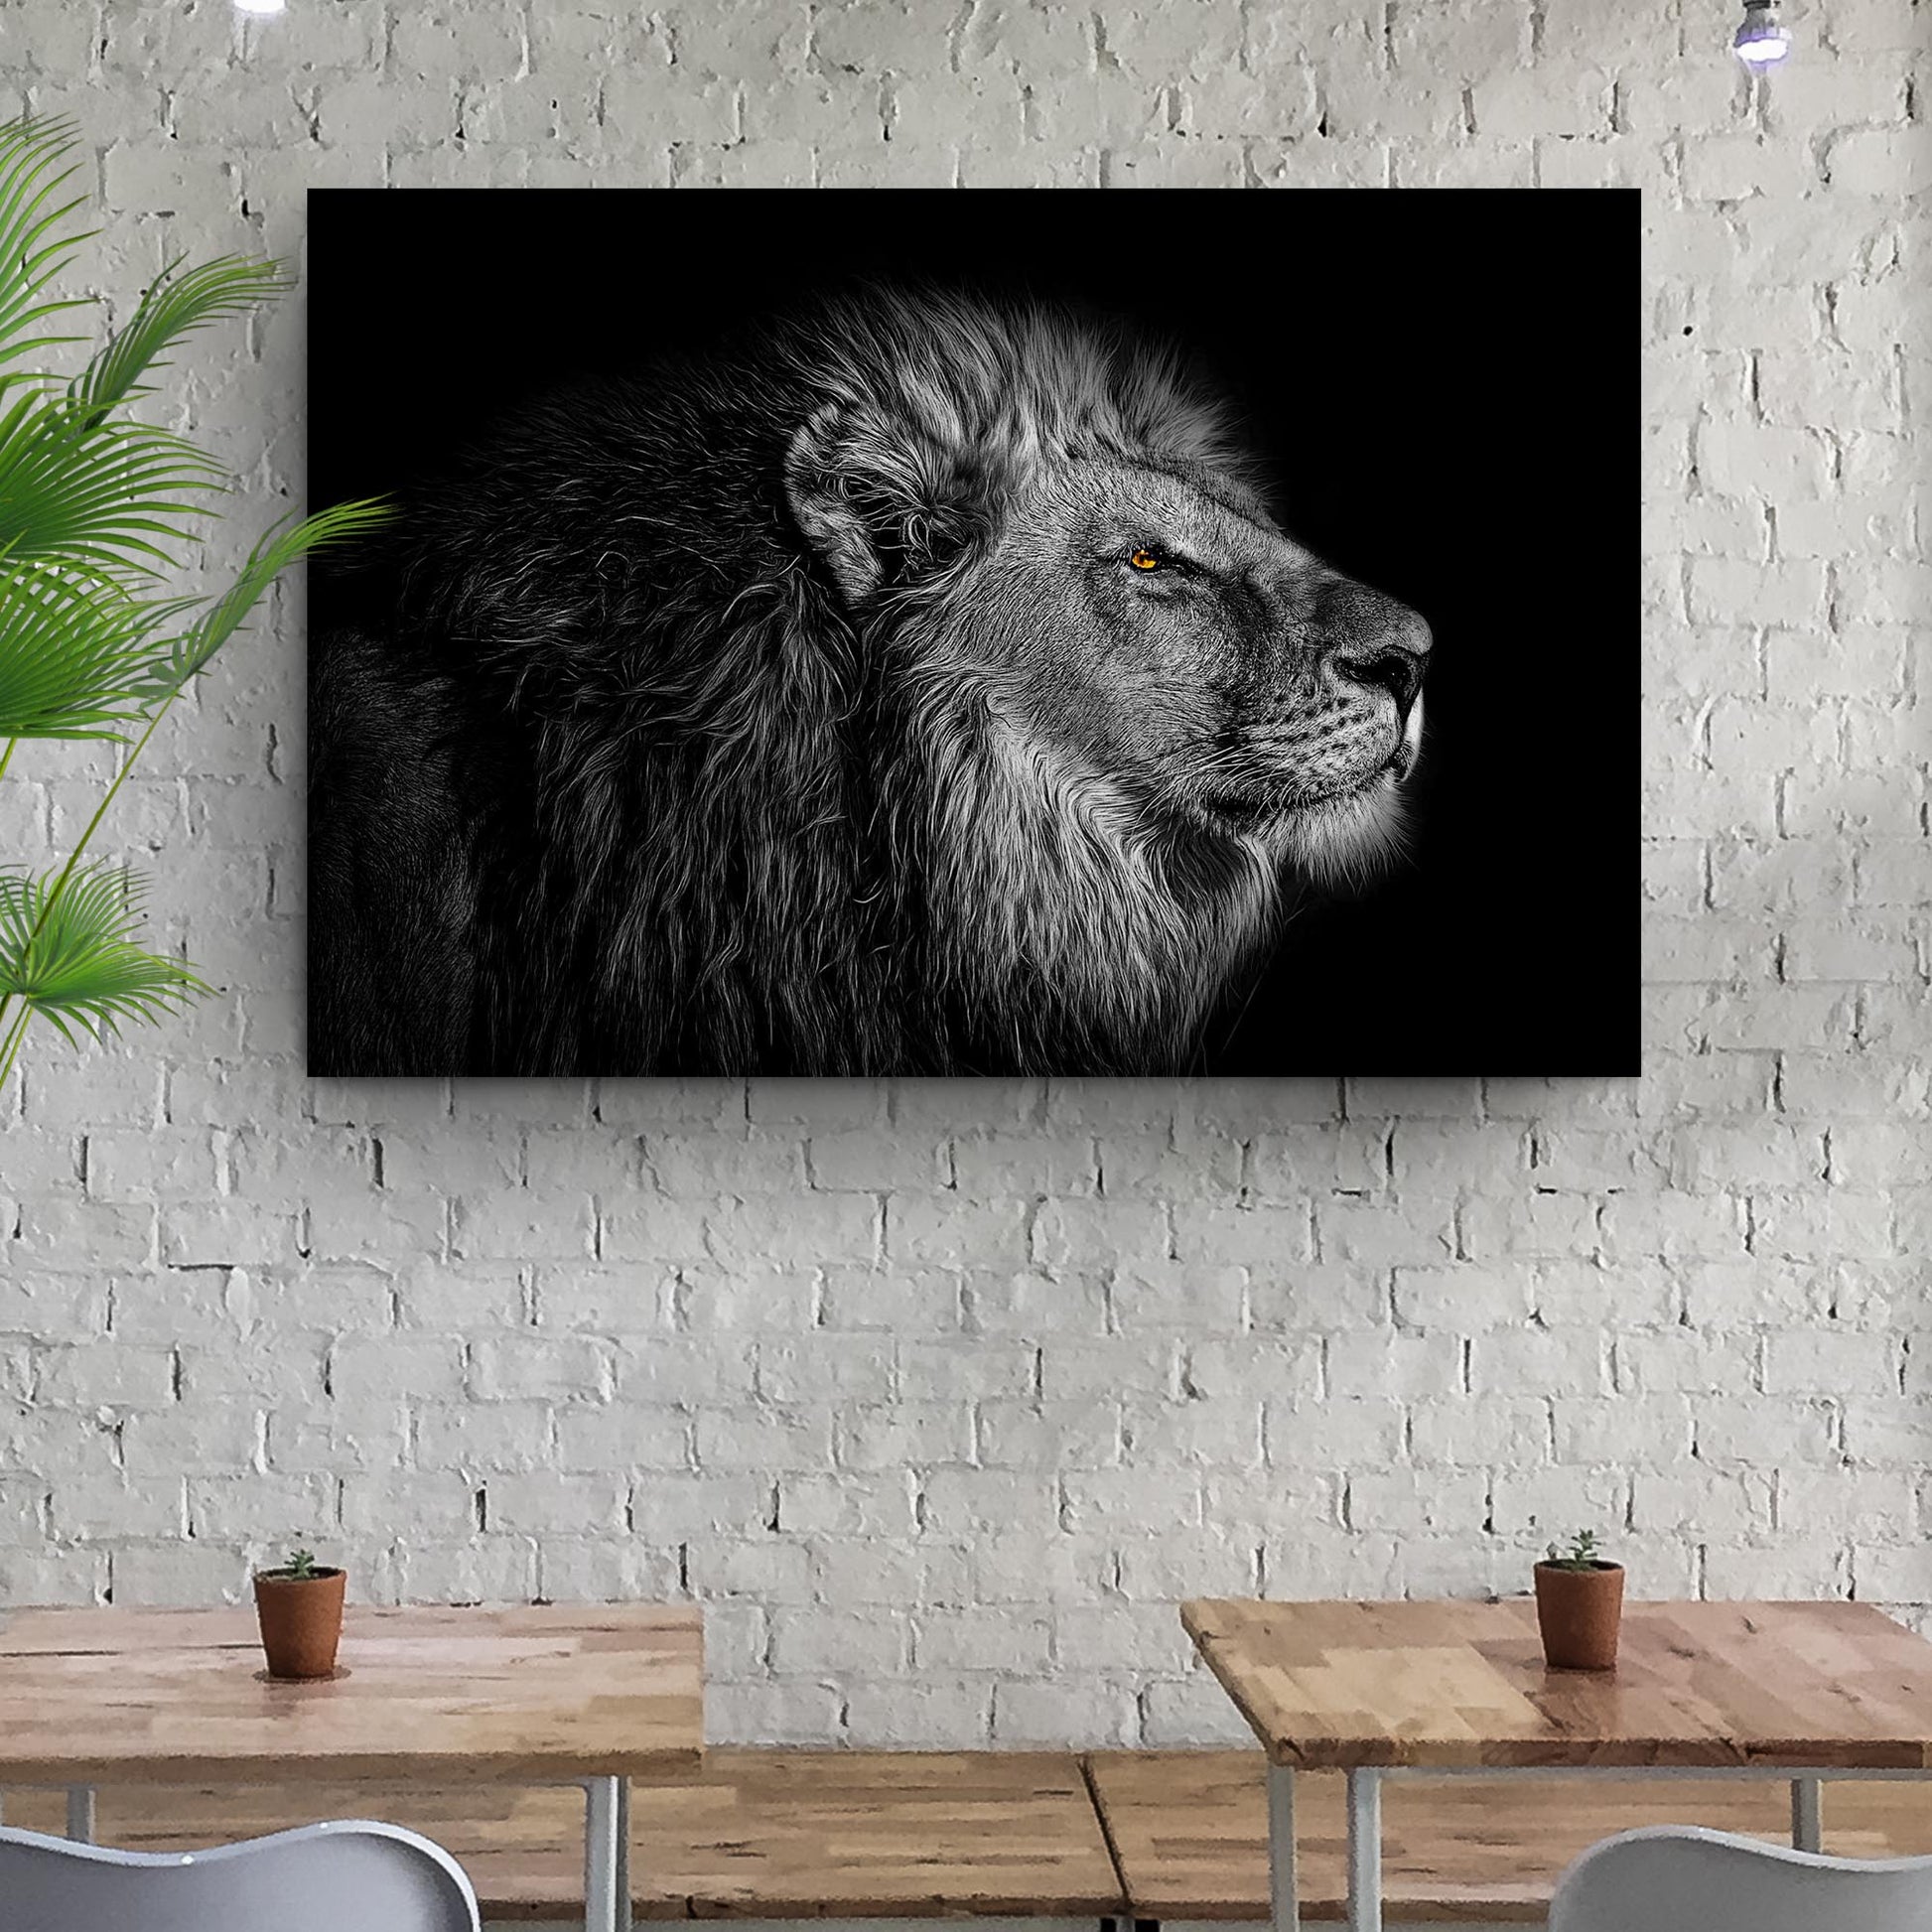 Black And White Lion Head Canvas Wall Art Style 1 - Image by Tailored Canvases